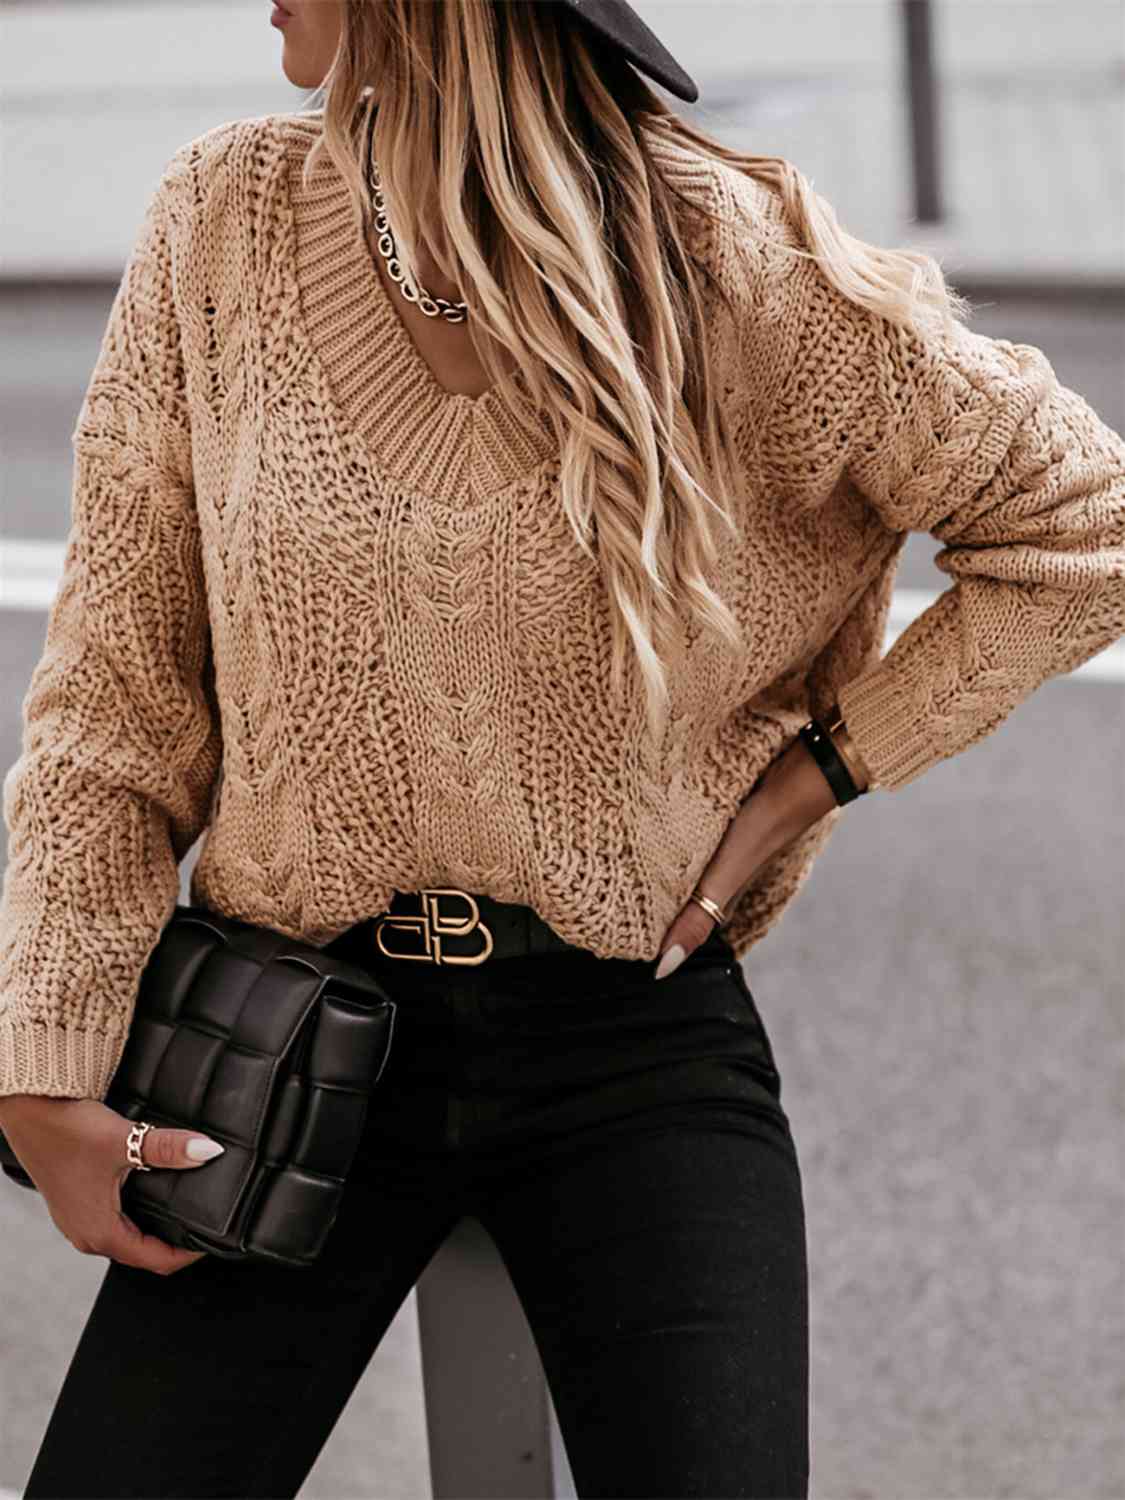 V-Neck Cable-Knit Long Sleeve Sweater - Fashion Girl Online Store